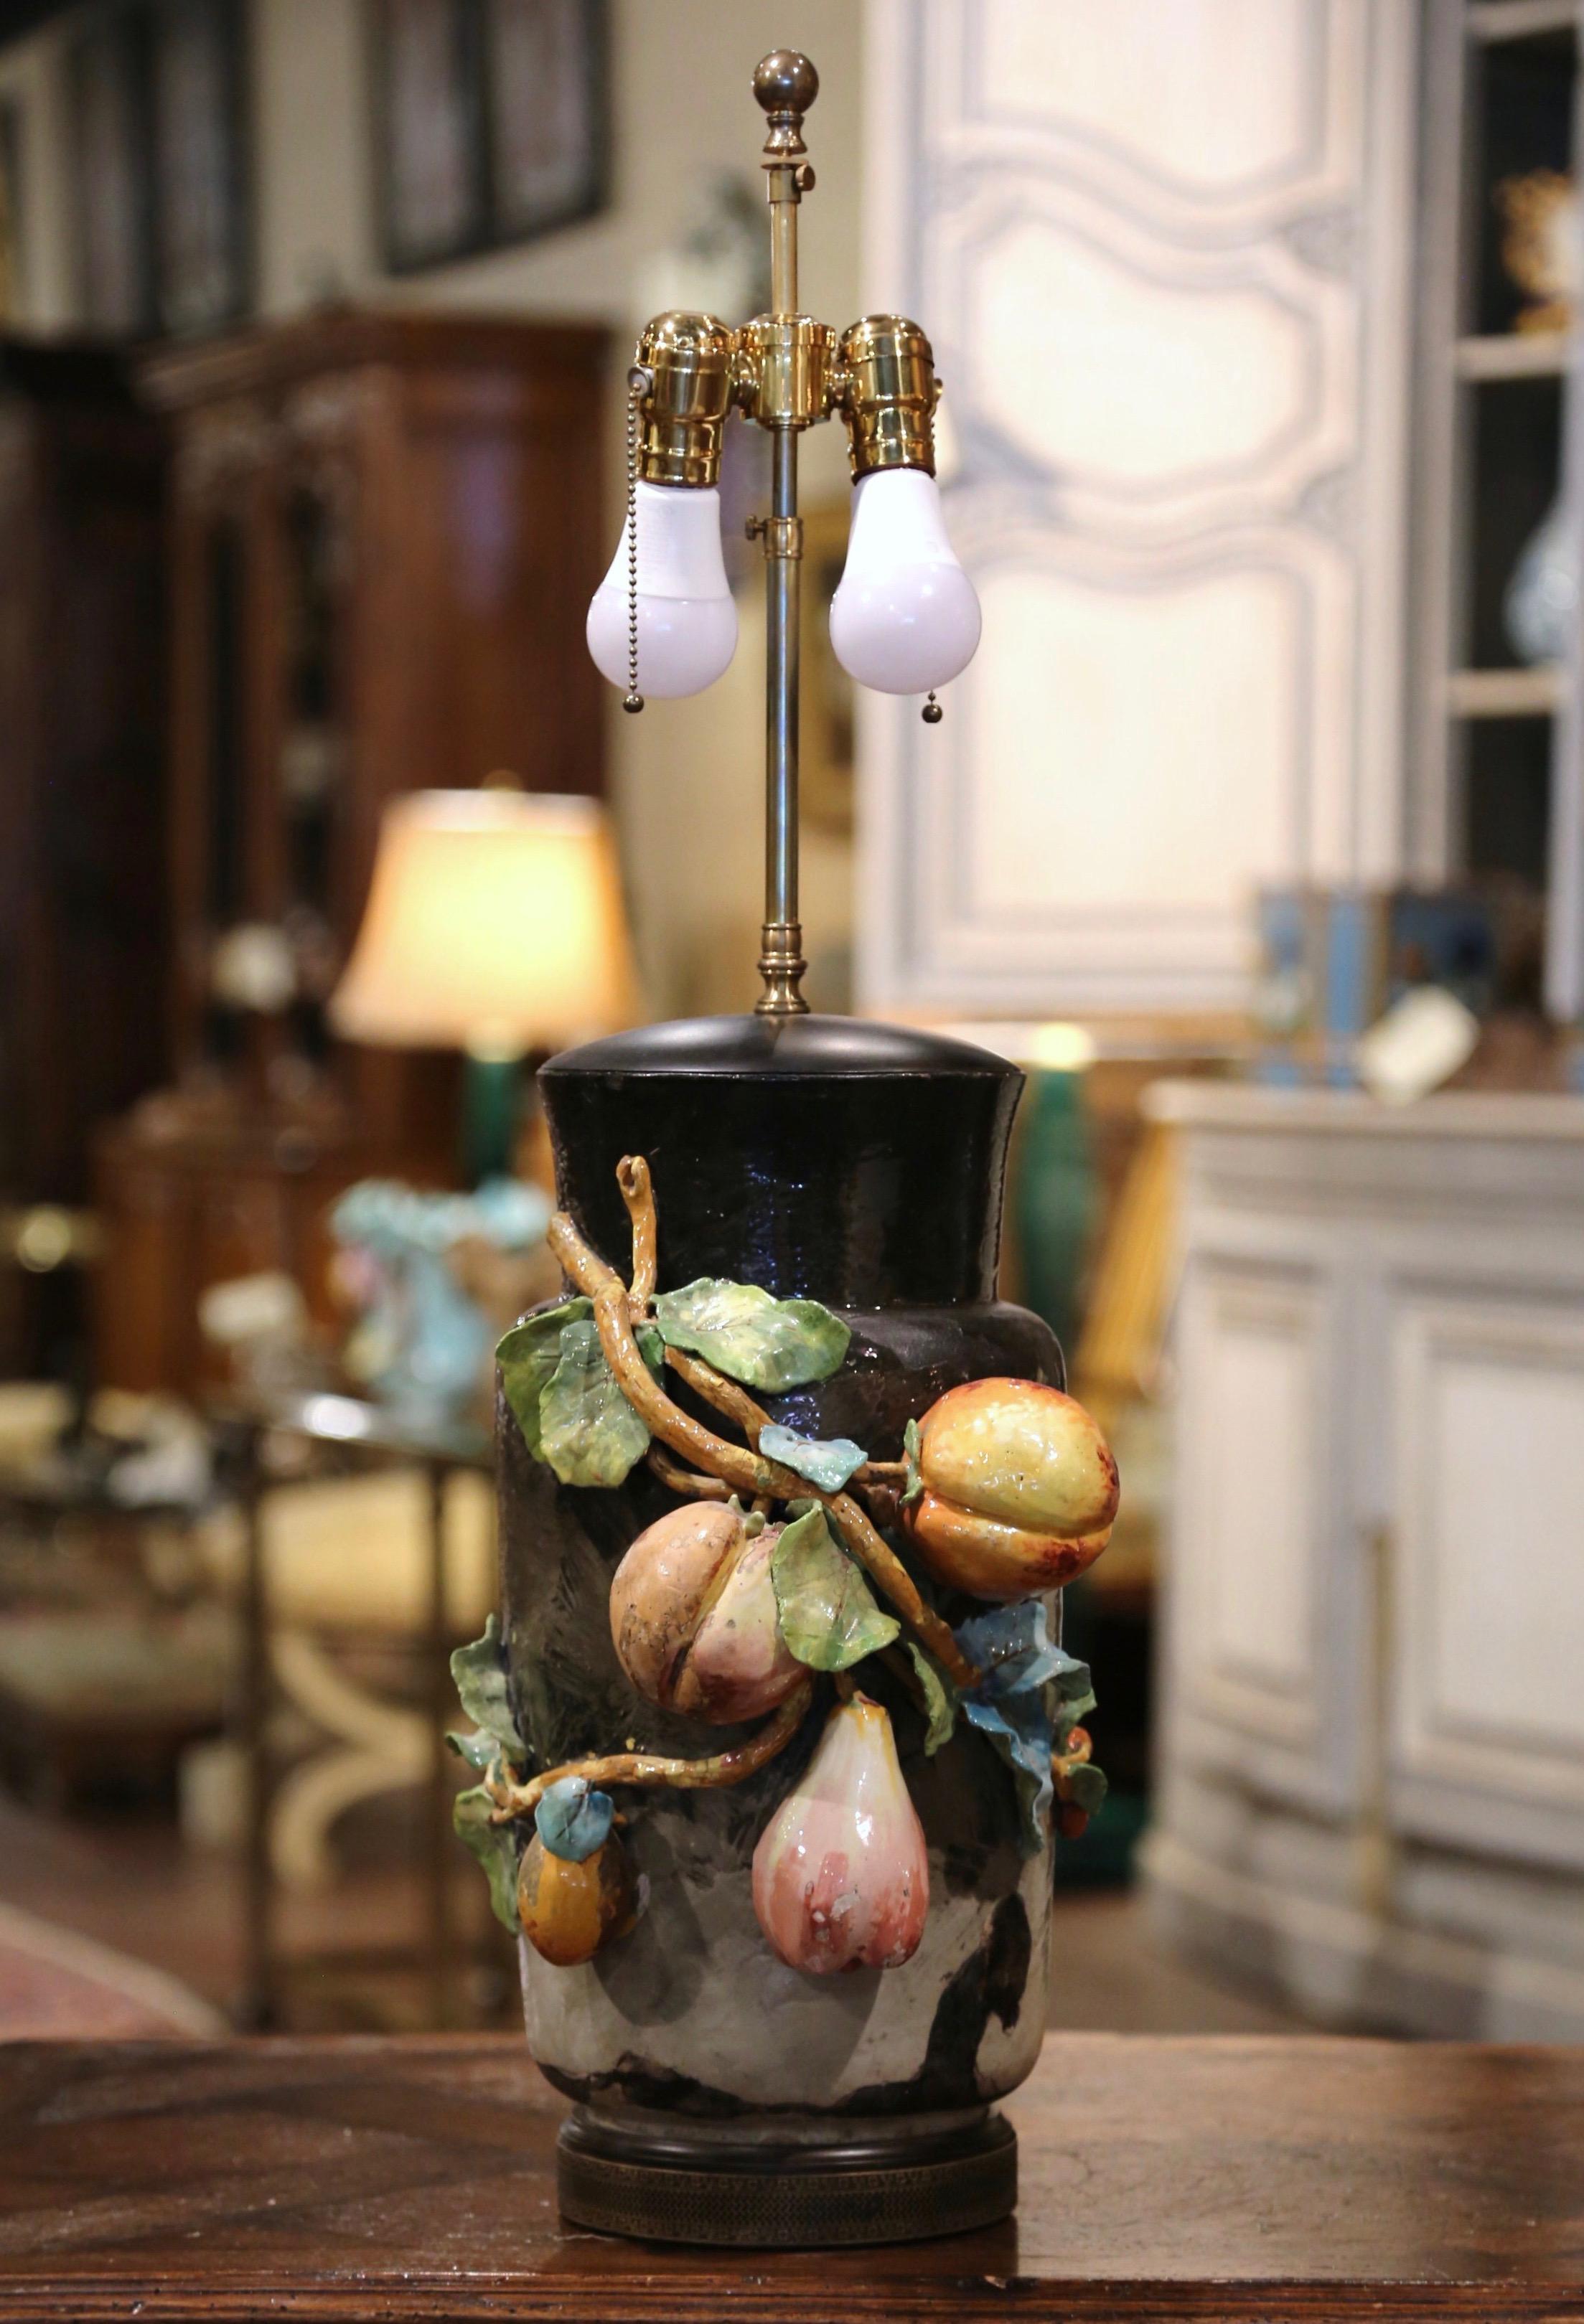 This beautiful, hand painted Majolica vase converted into a table lamp was sculpted in Montigny sur Loing, France, circa 1870. This black, green and grey ceramic vase stands on a wooden base and is decorated with colorful high relief fruit motifs